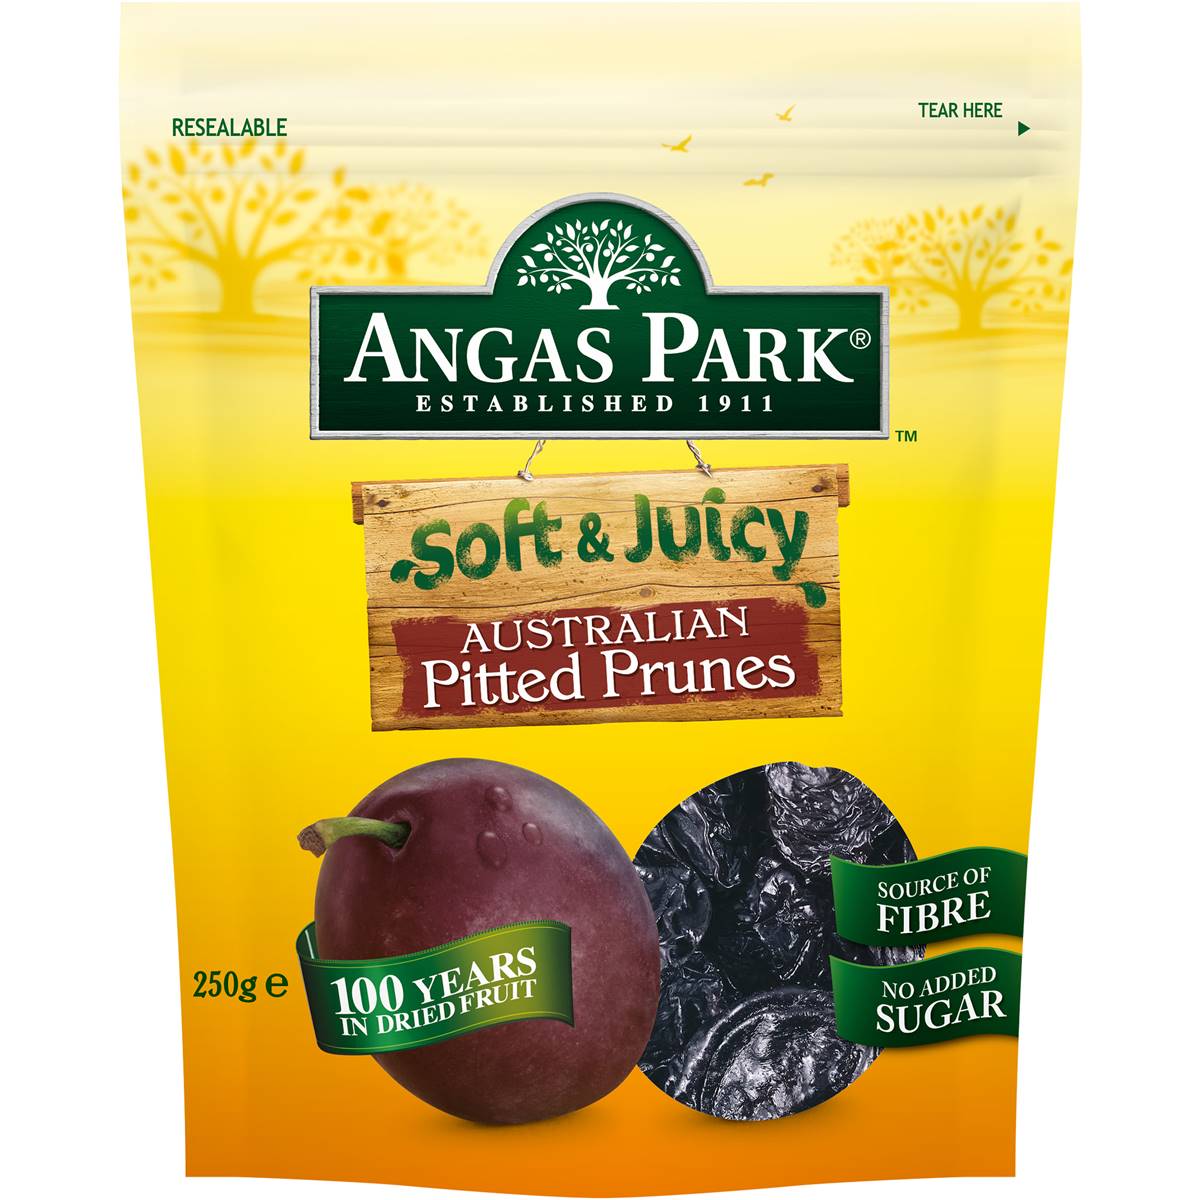 Angas Park Soft & Juicy Pitted Prunes 250g